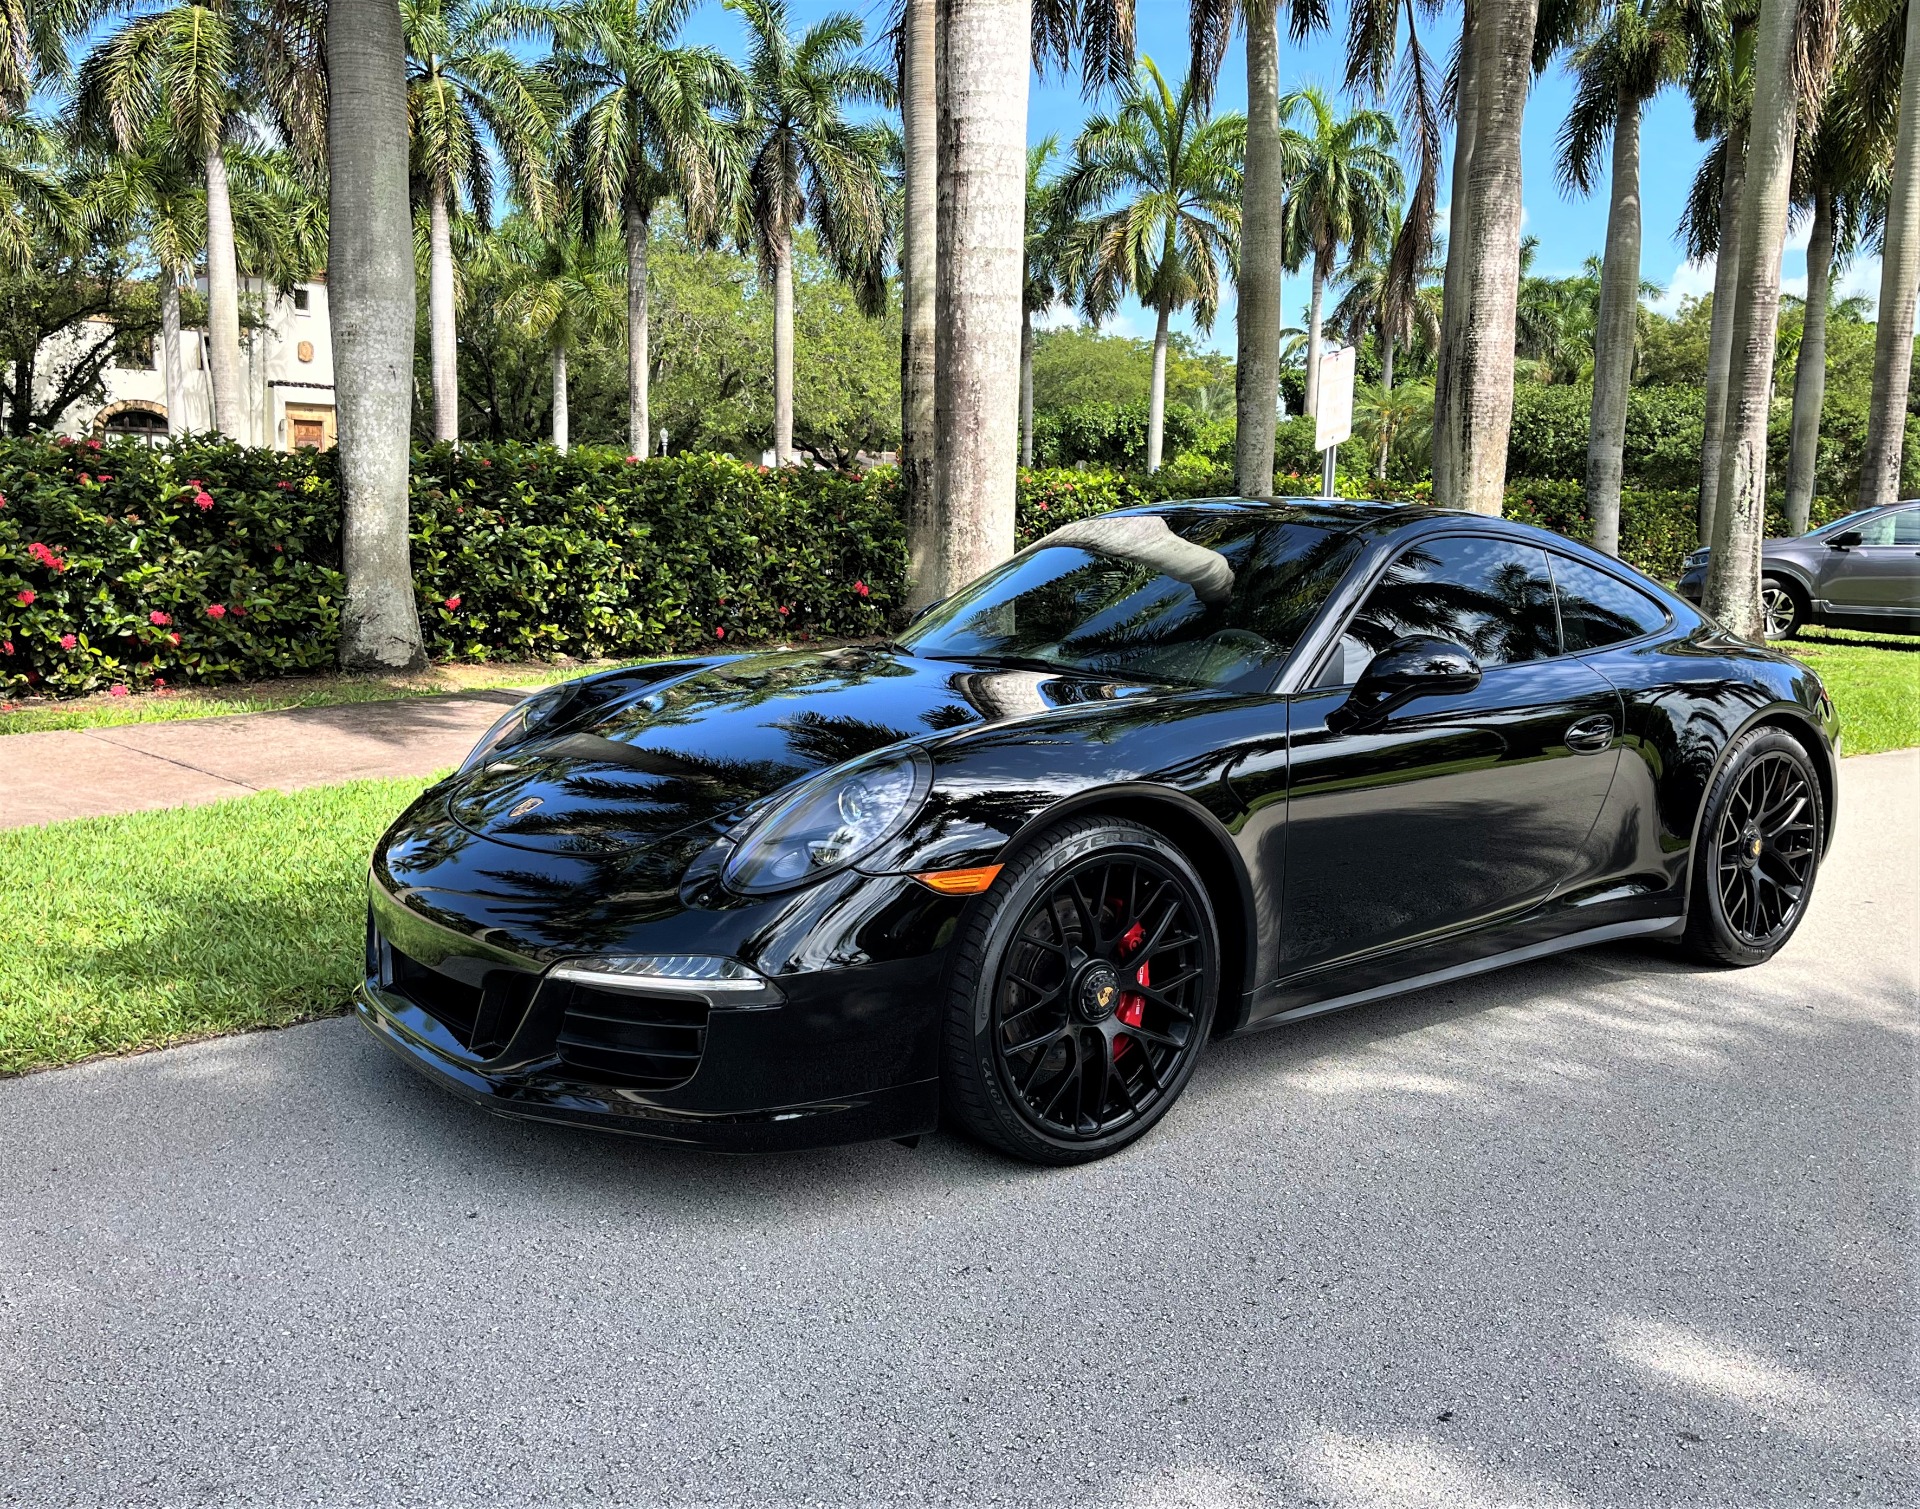 Used 2016 Porsche 911 Carrera 4 GTS for sale $119,850 at The Gables Sports Cars in Miami FL 33146 4